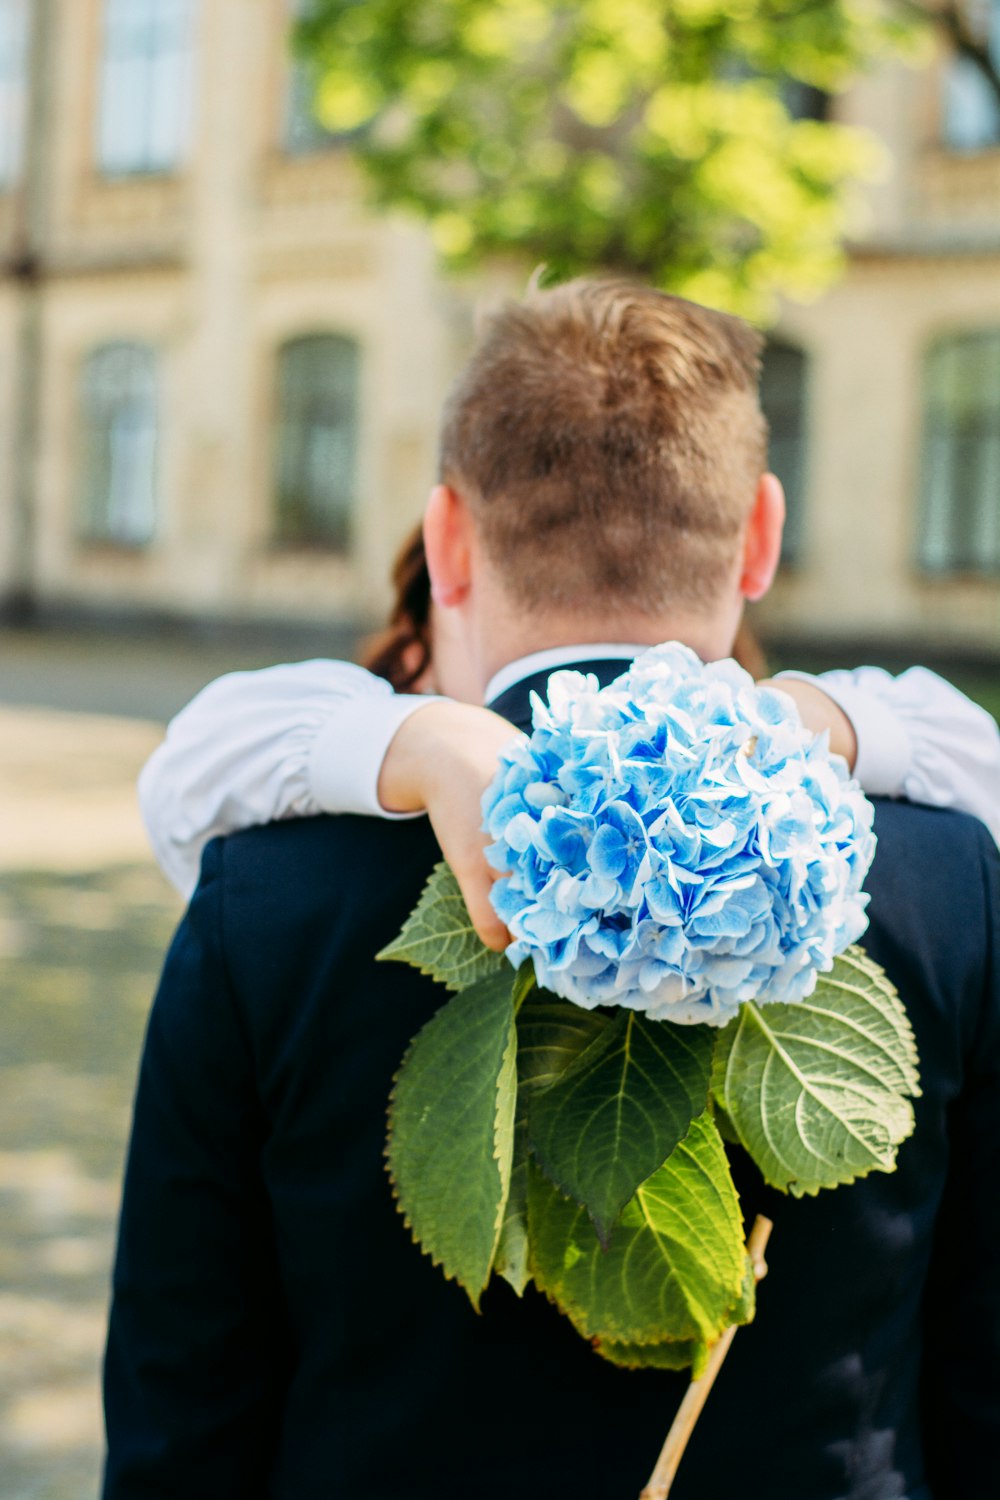 a young boy holding a blue flower in his hands